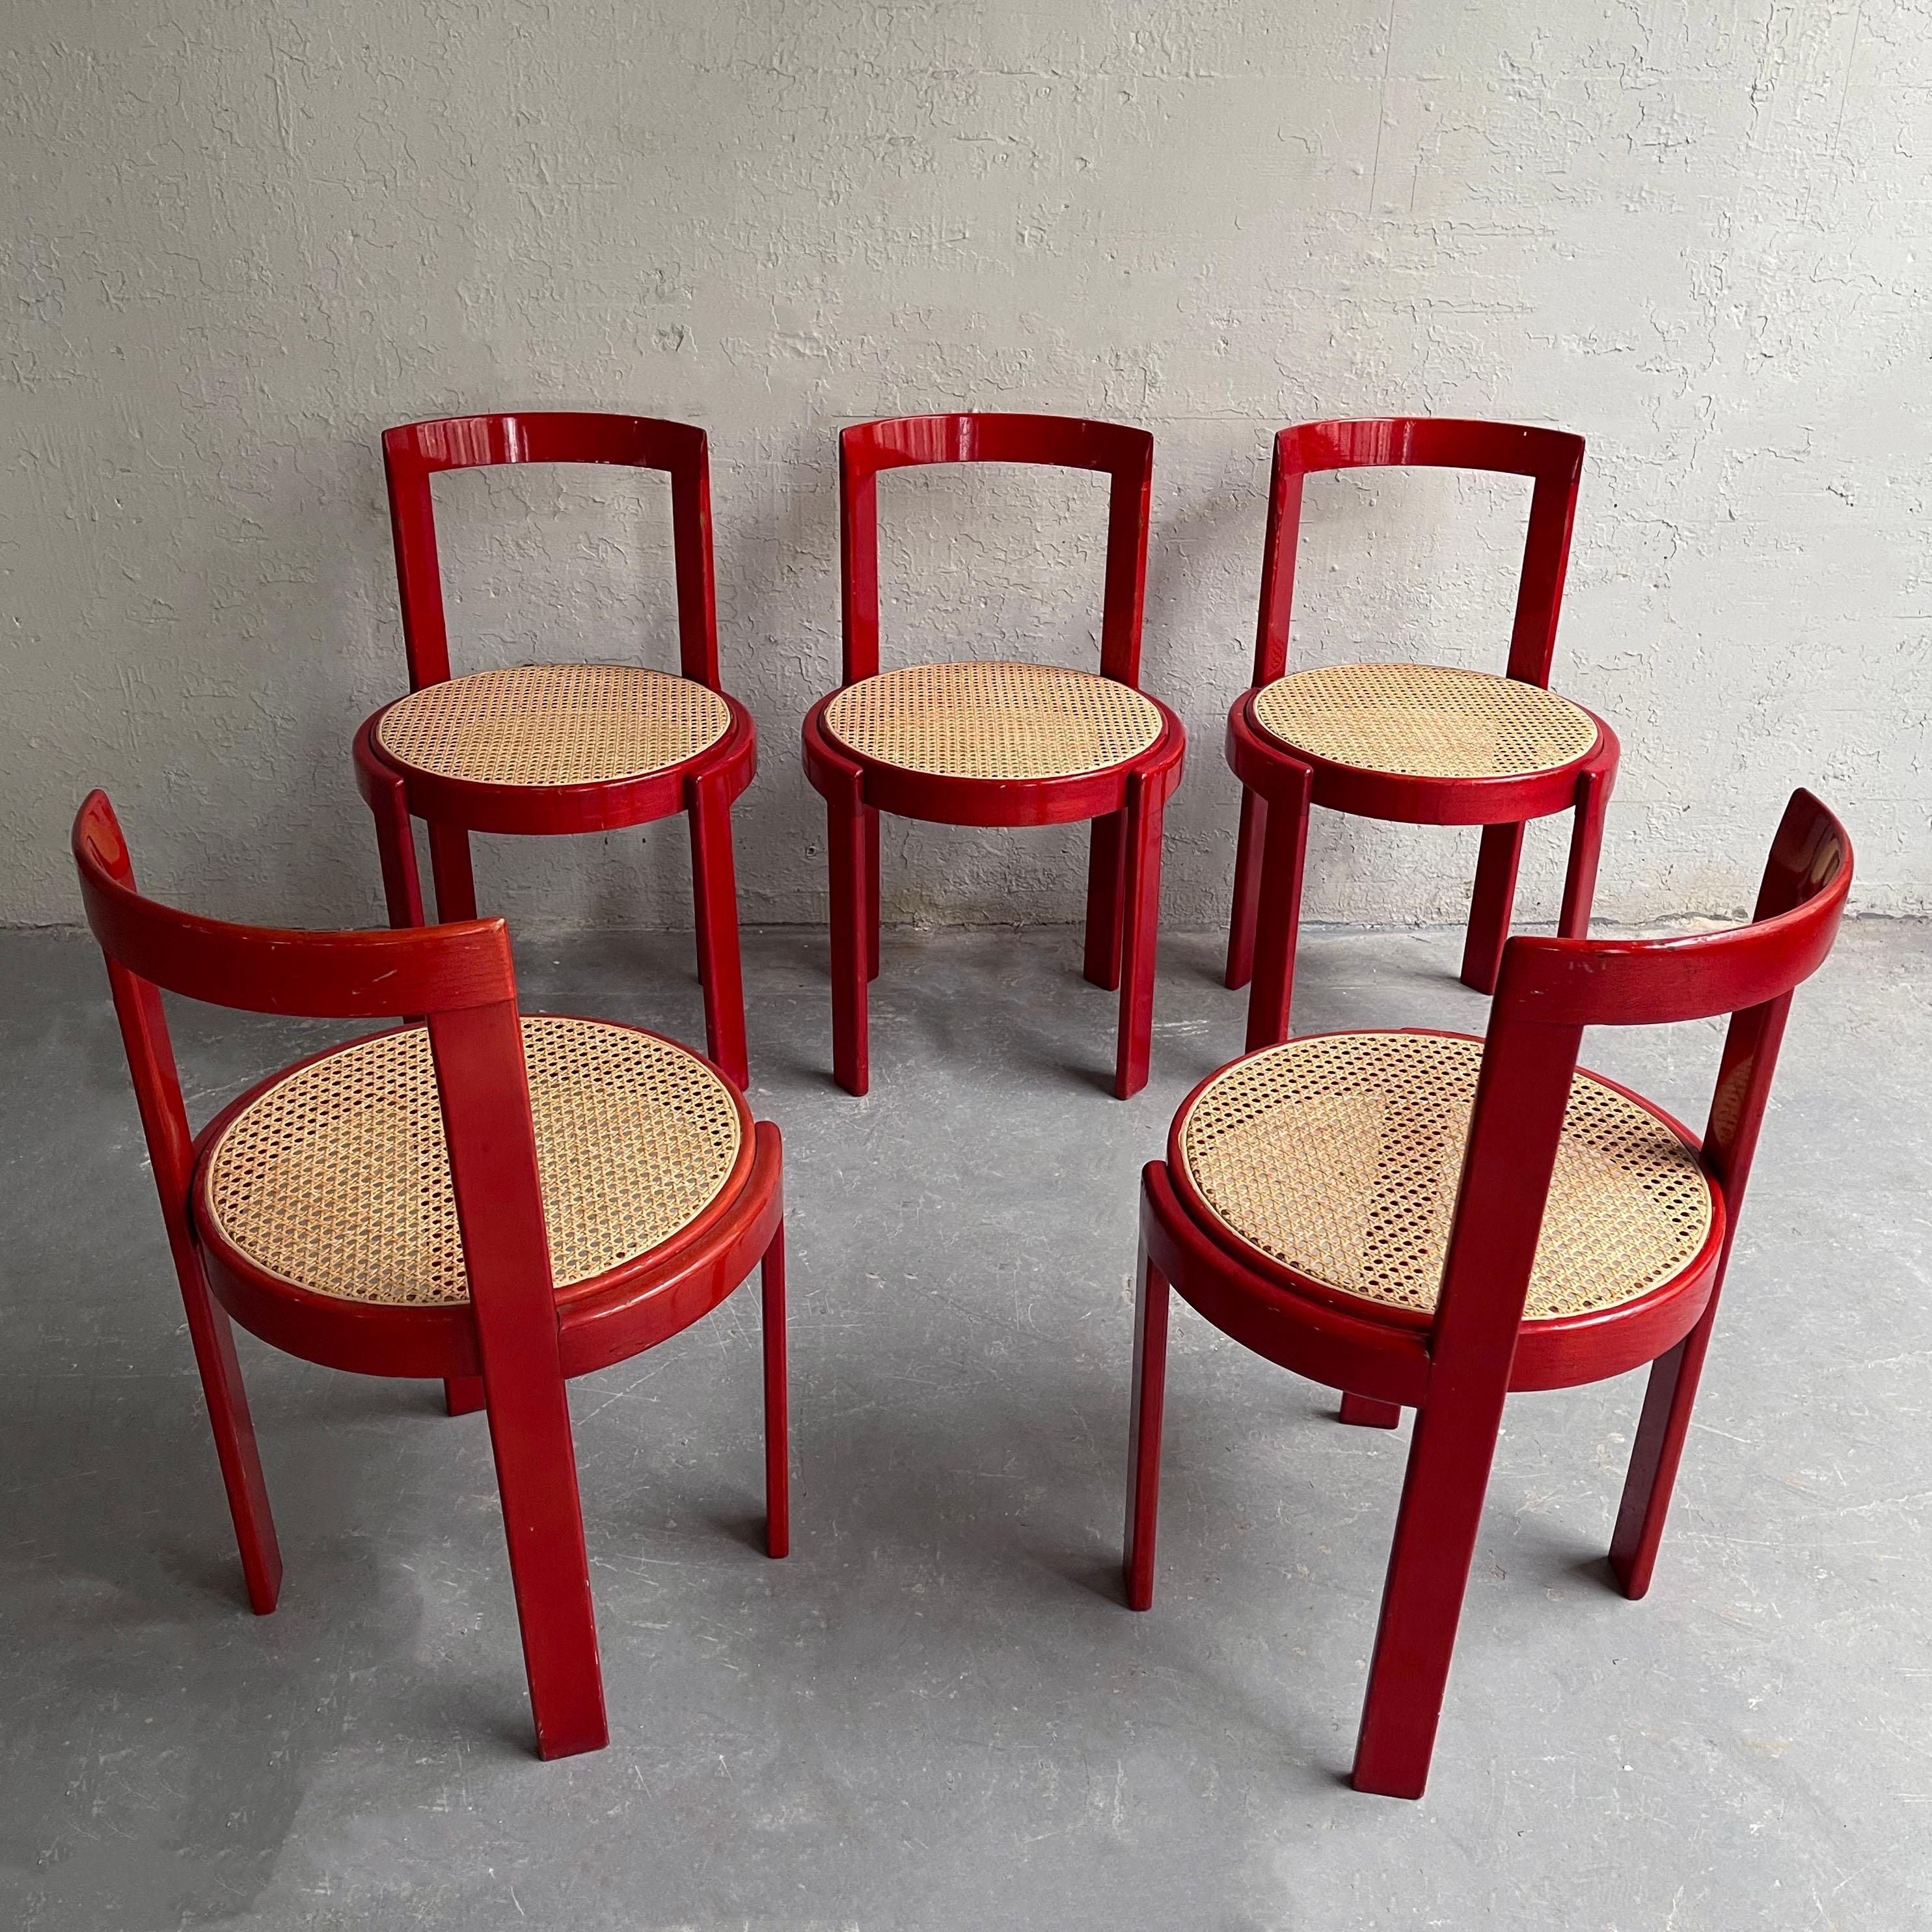 20th Century Italian Modernist Circular Bentwood And Cane Dining Chairs Set Of 6 For Sale